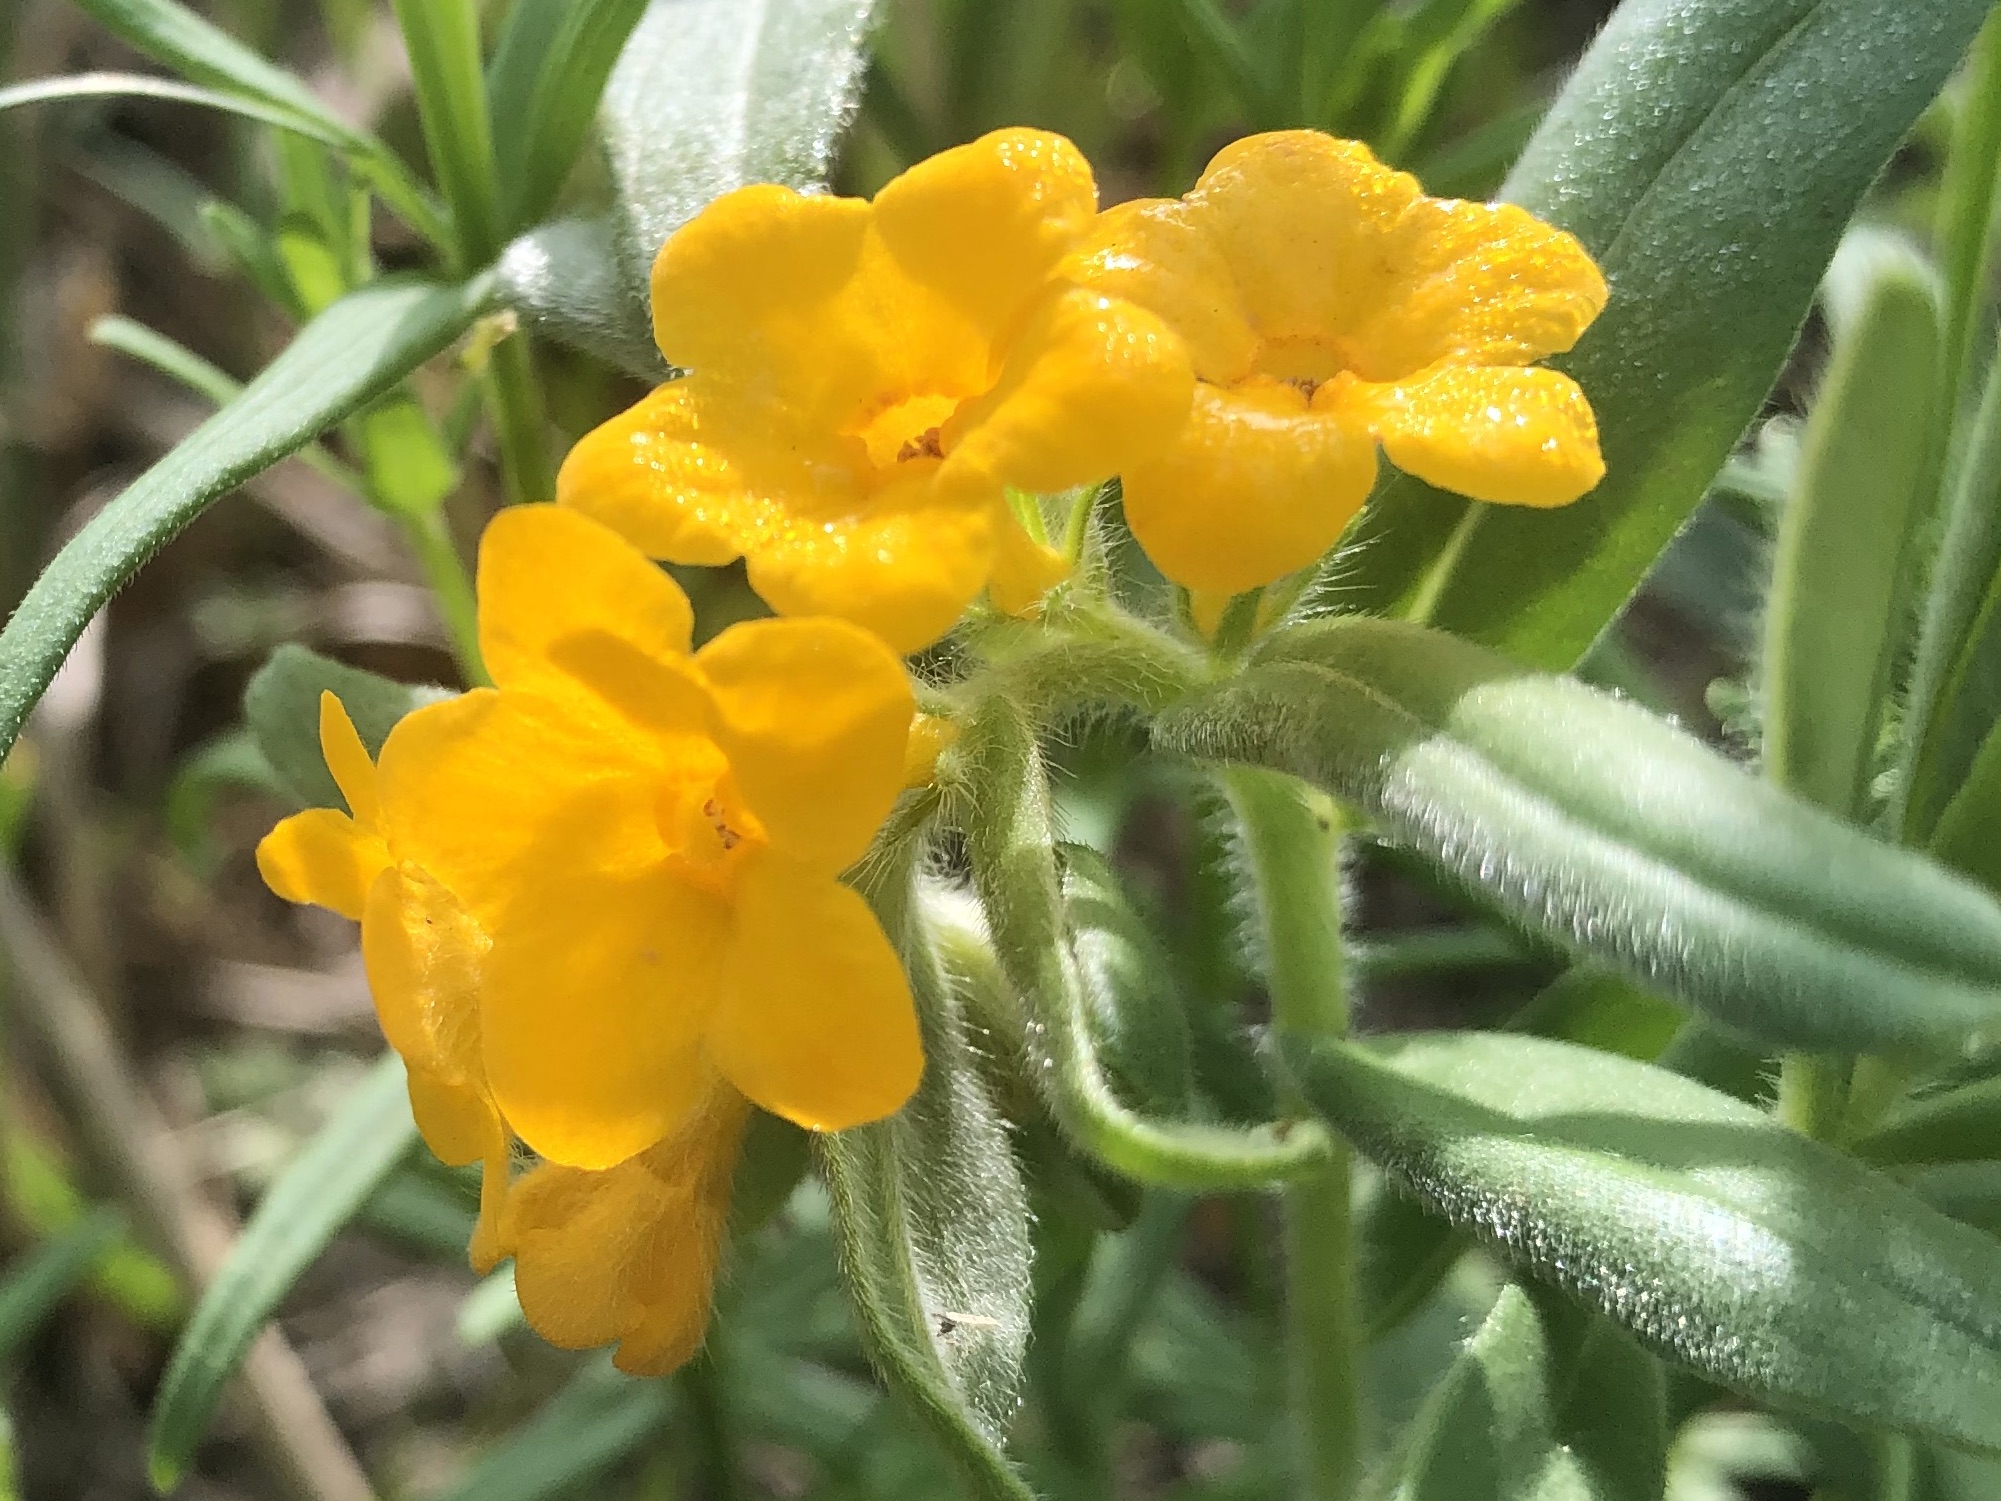 Hoary Puccoon in the Curtis Prairie in the University of Wisconsin-Madison Arboretum in Madison, Wisconsin on May 17, 2022.